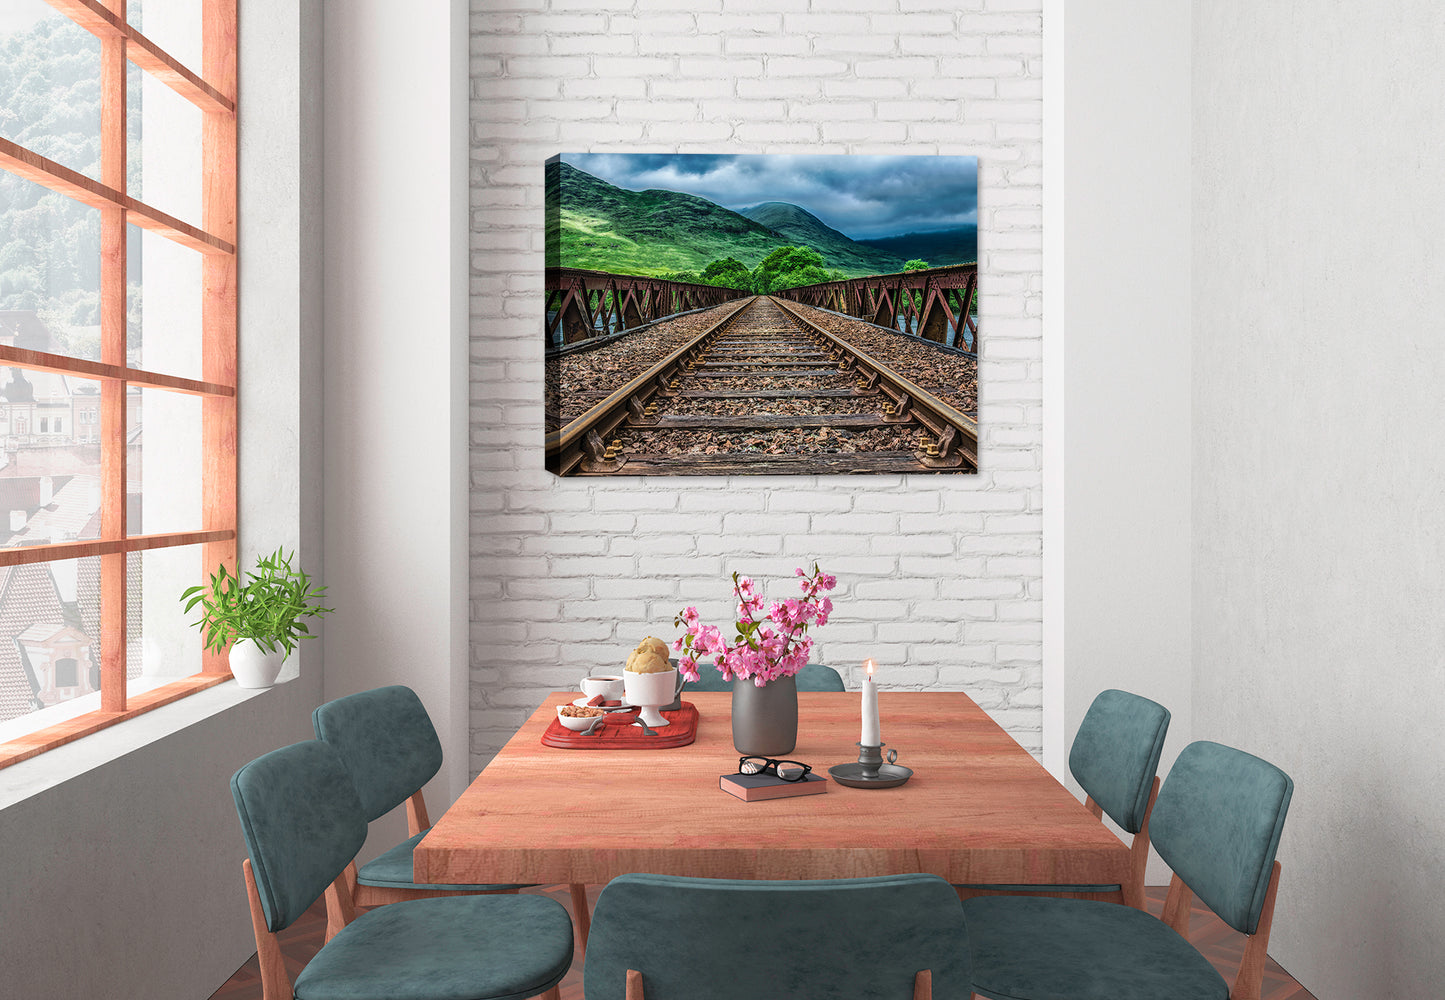 Railroad Tracks over River - Fine Art Photography on Canvas